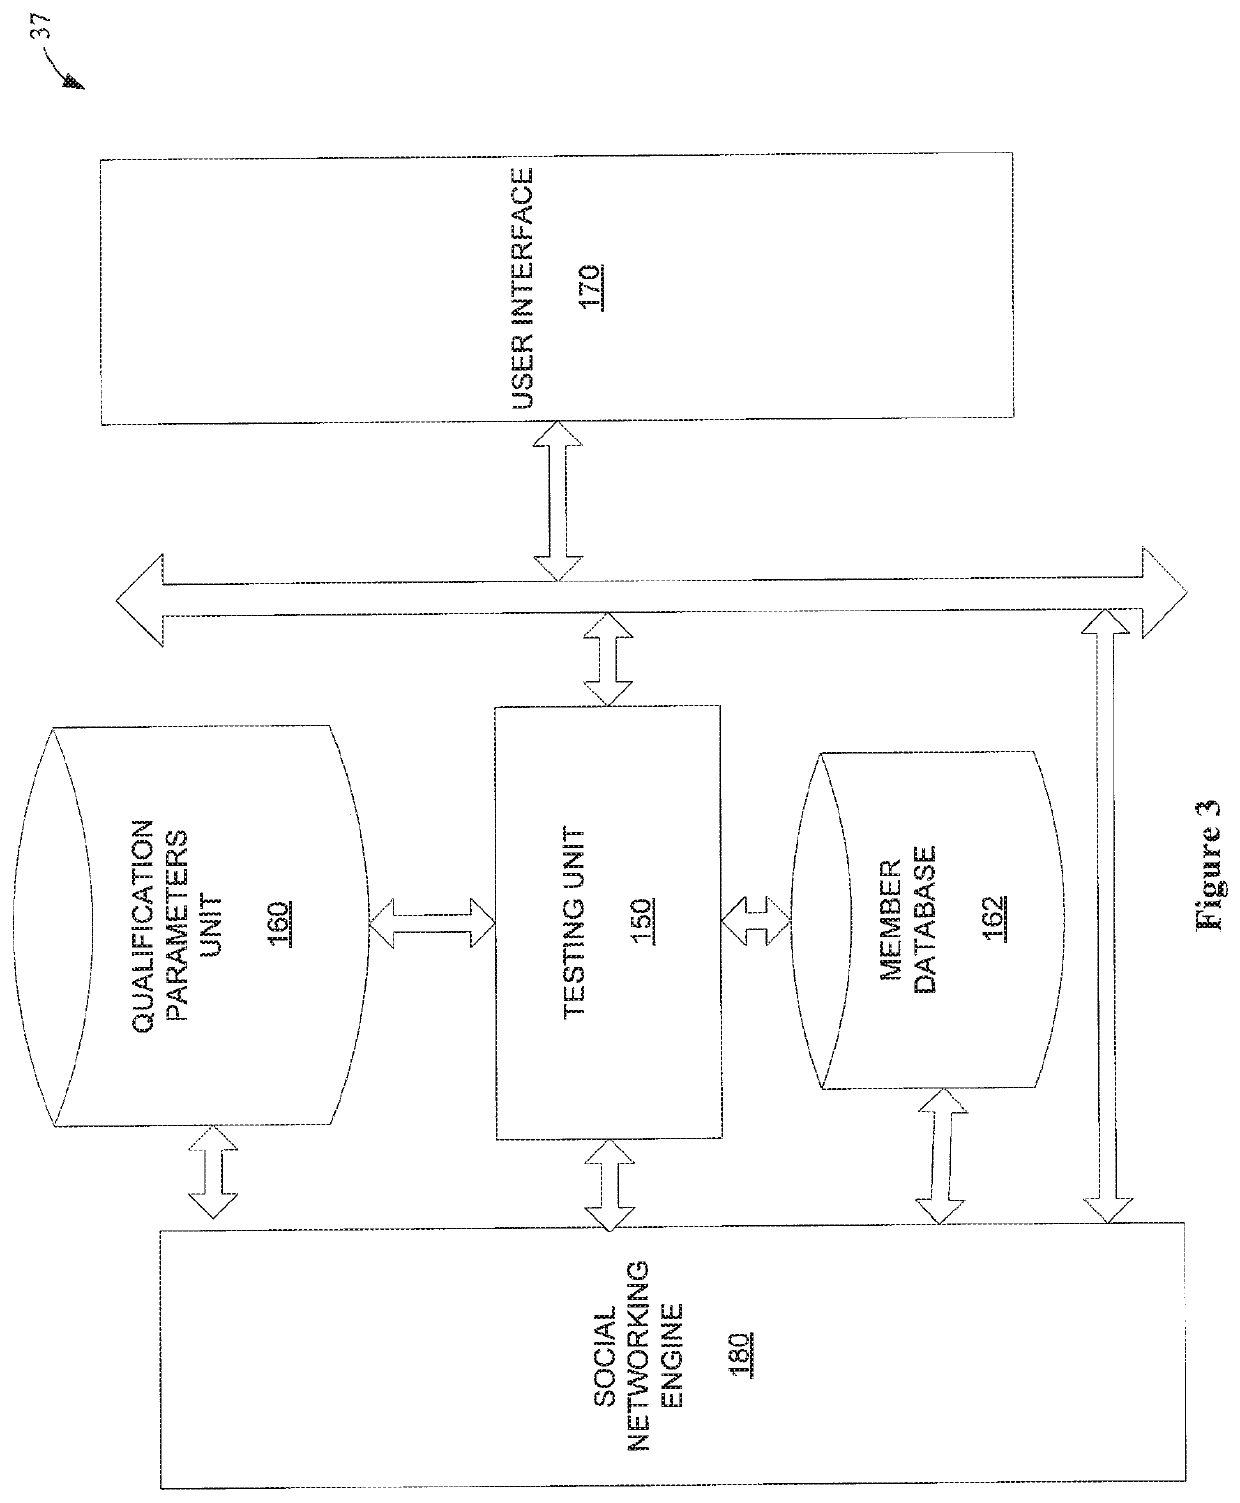 Method and apparatus for social network qualification systems